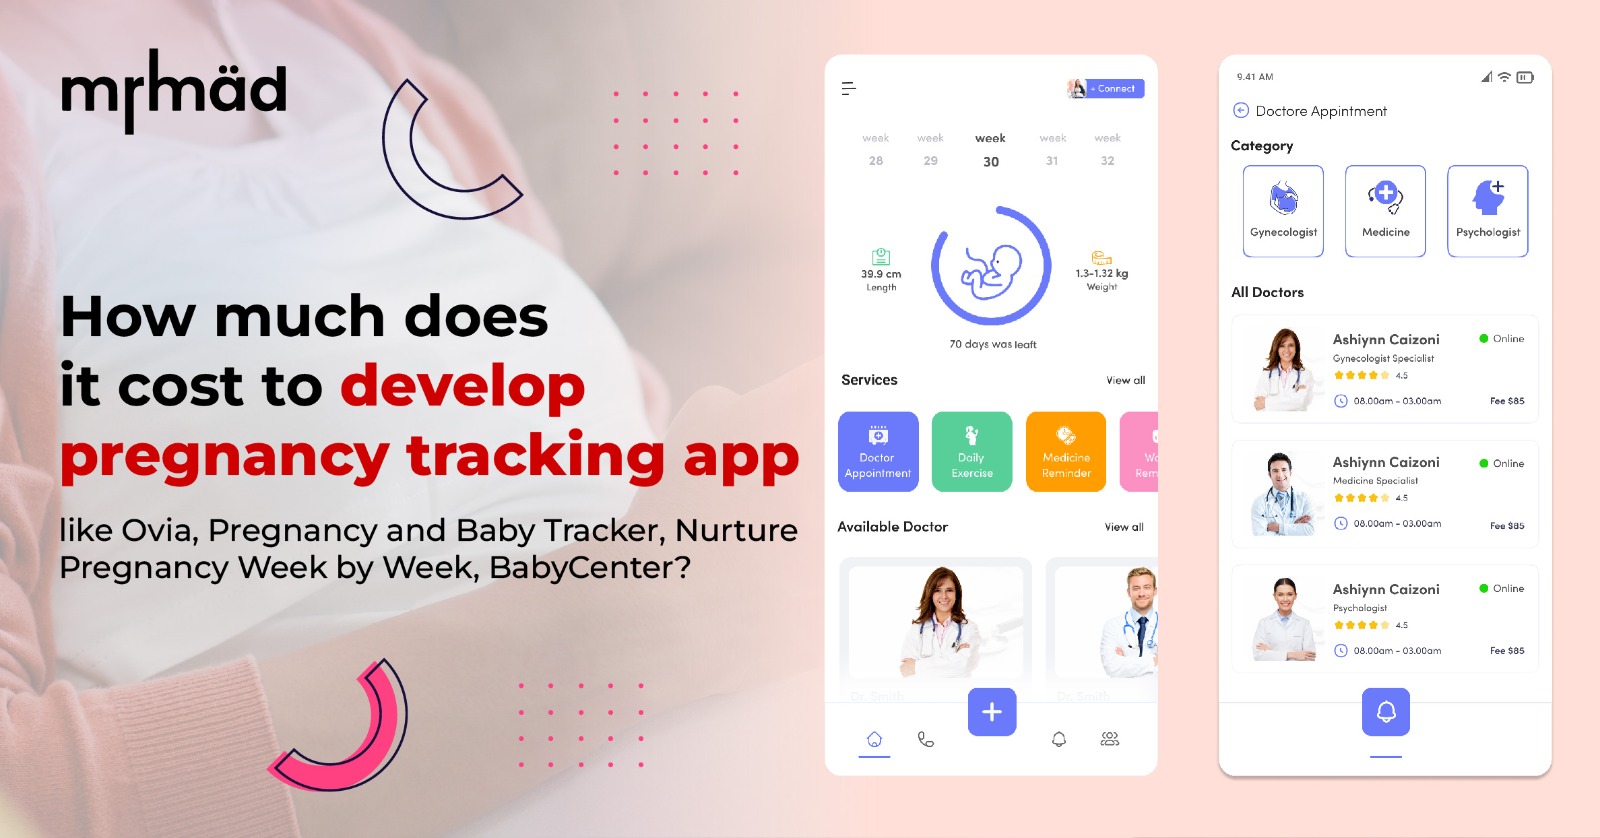 How much does it cost to develop pregnancy tracking app like Ovia, Pregnancy and Baby Tracker, Nurture Pregnancy Week by Week, BabyCenter?